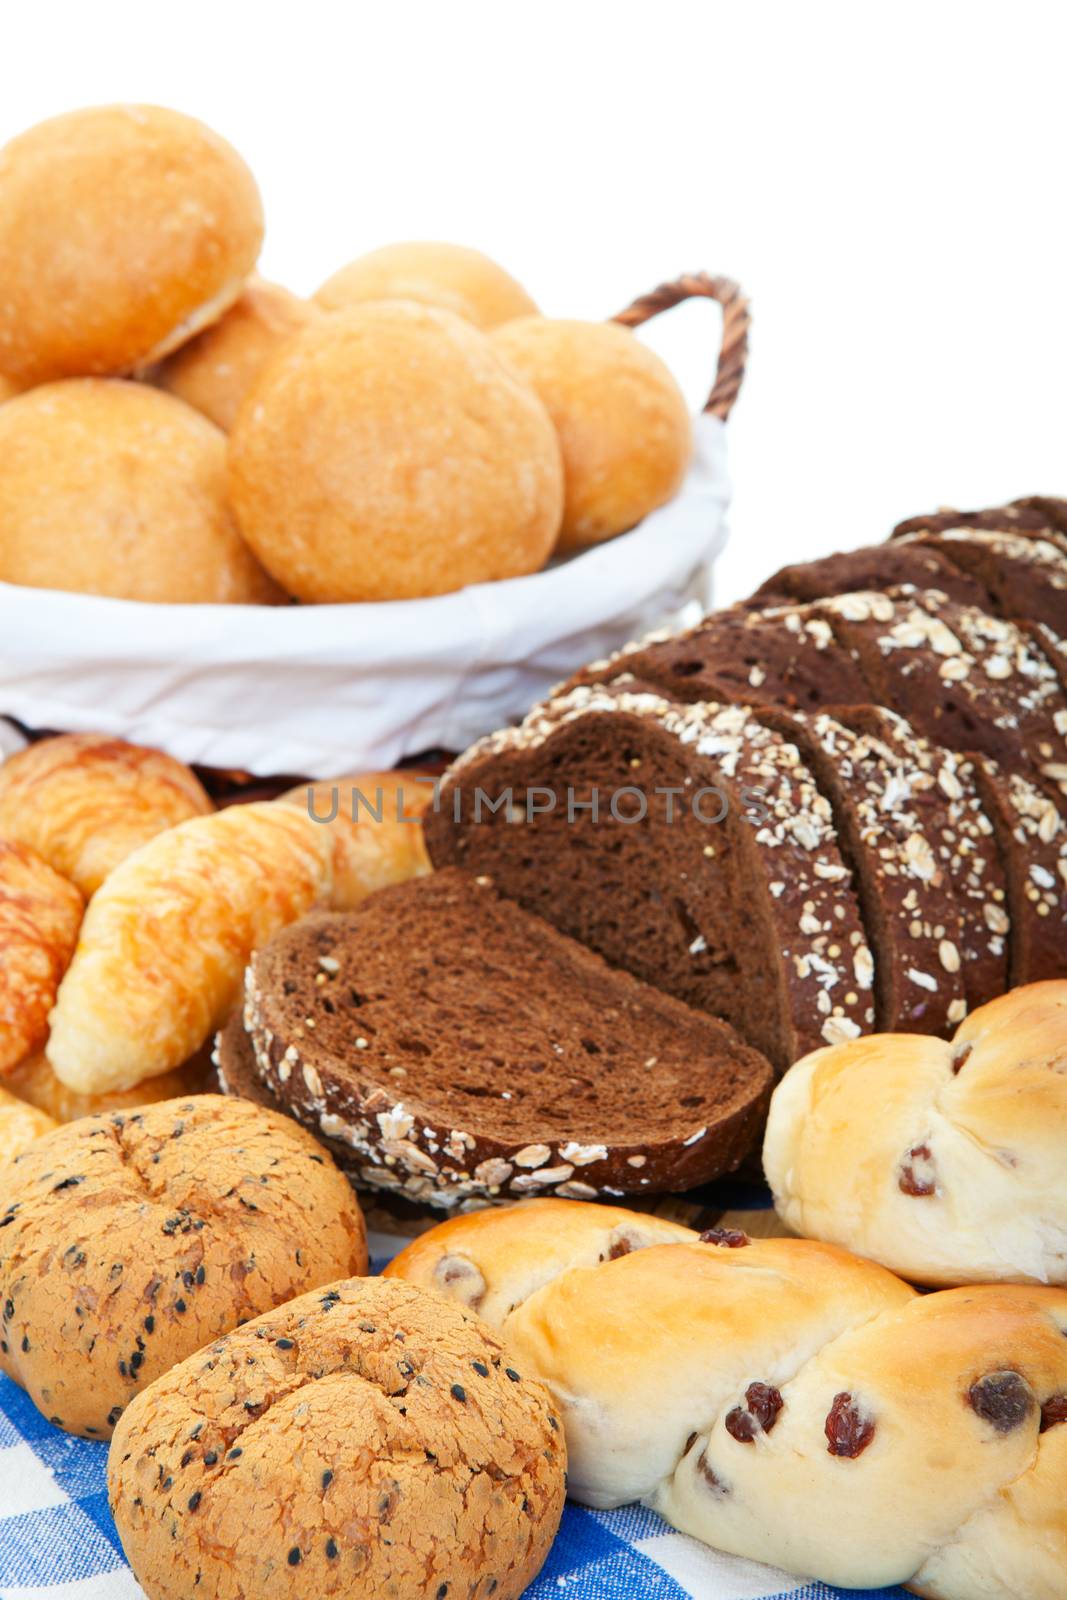 An arrangement of different kinds of breads and buns. 